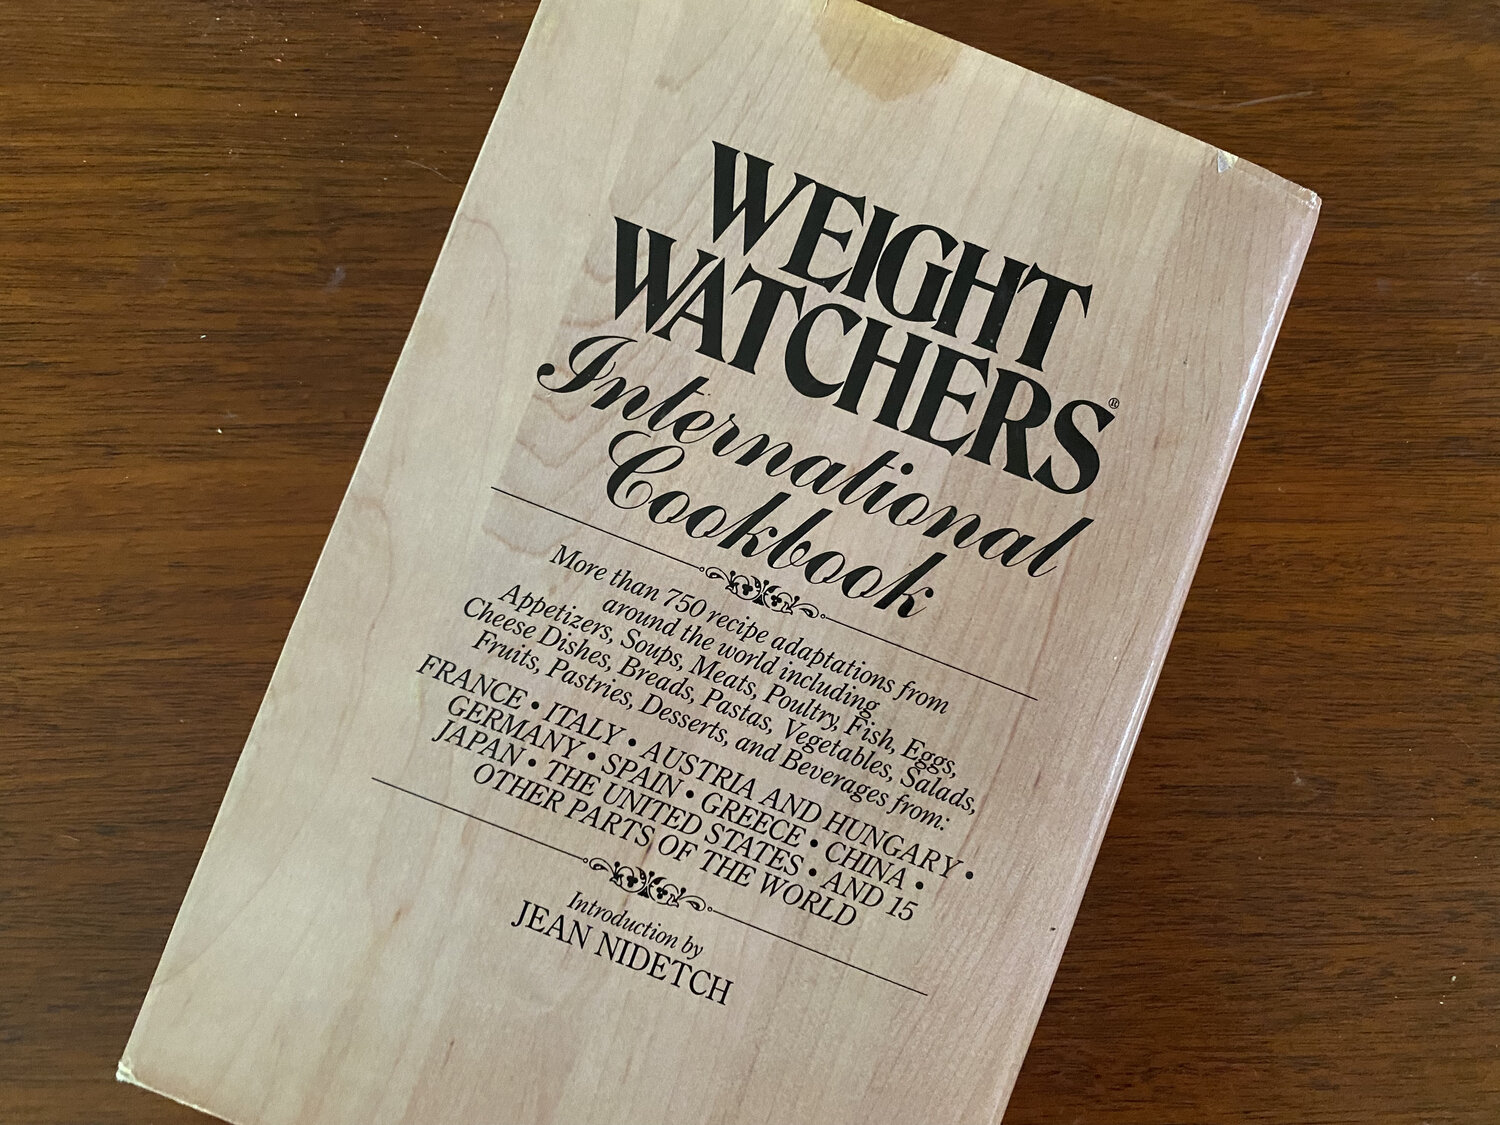 Jean Nidetch's Weight Watcher Scale